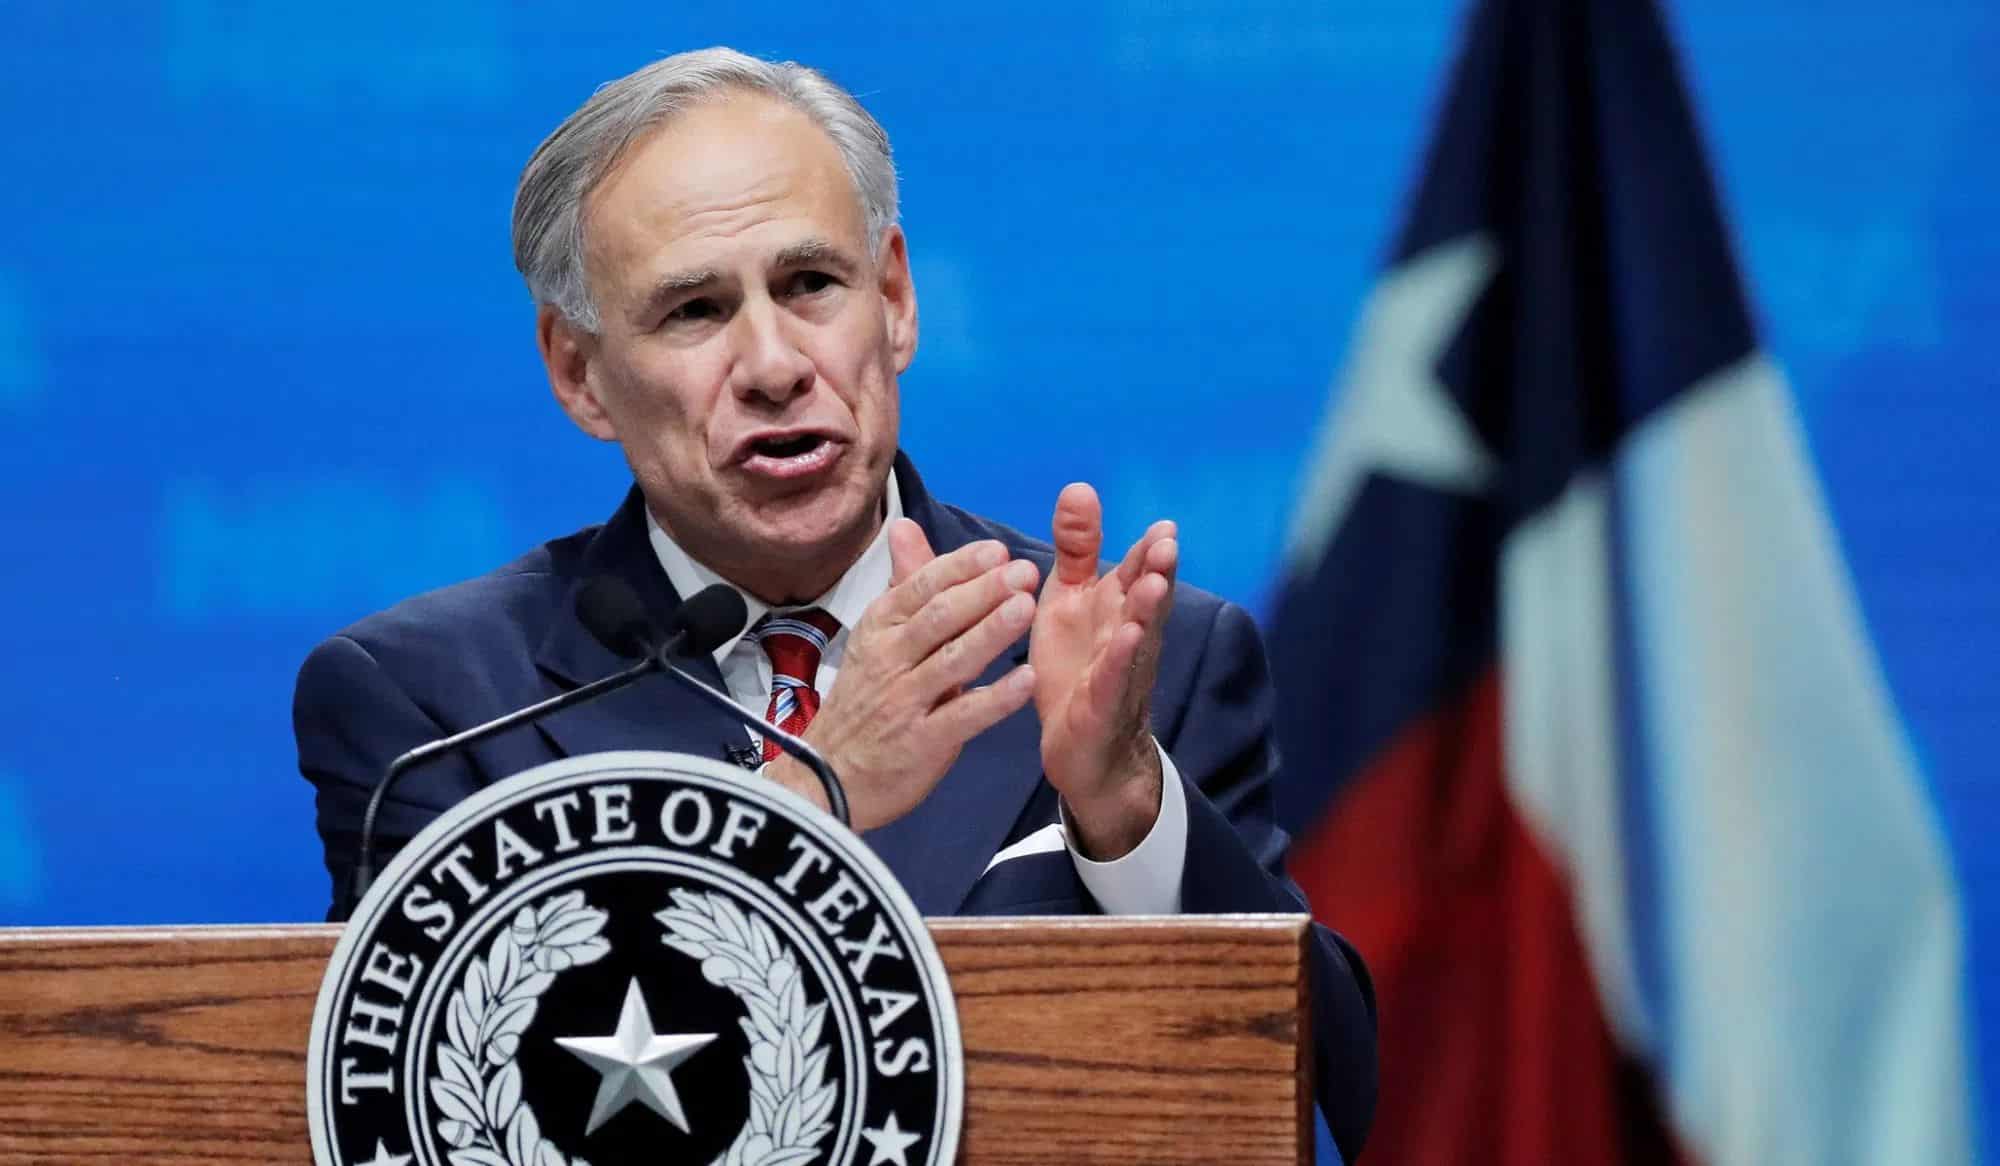 Texas Governor Abbott Has Made It Easier, Not Harder, to Vote